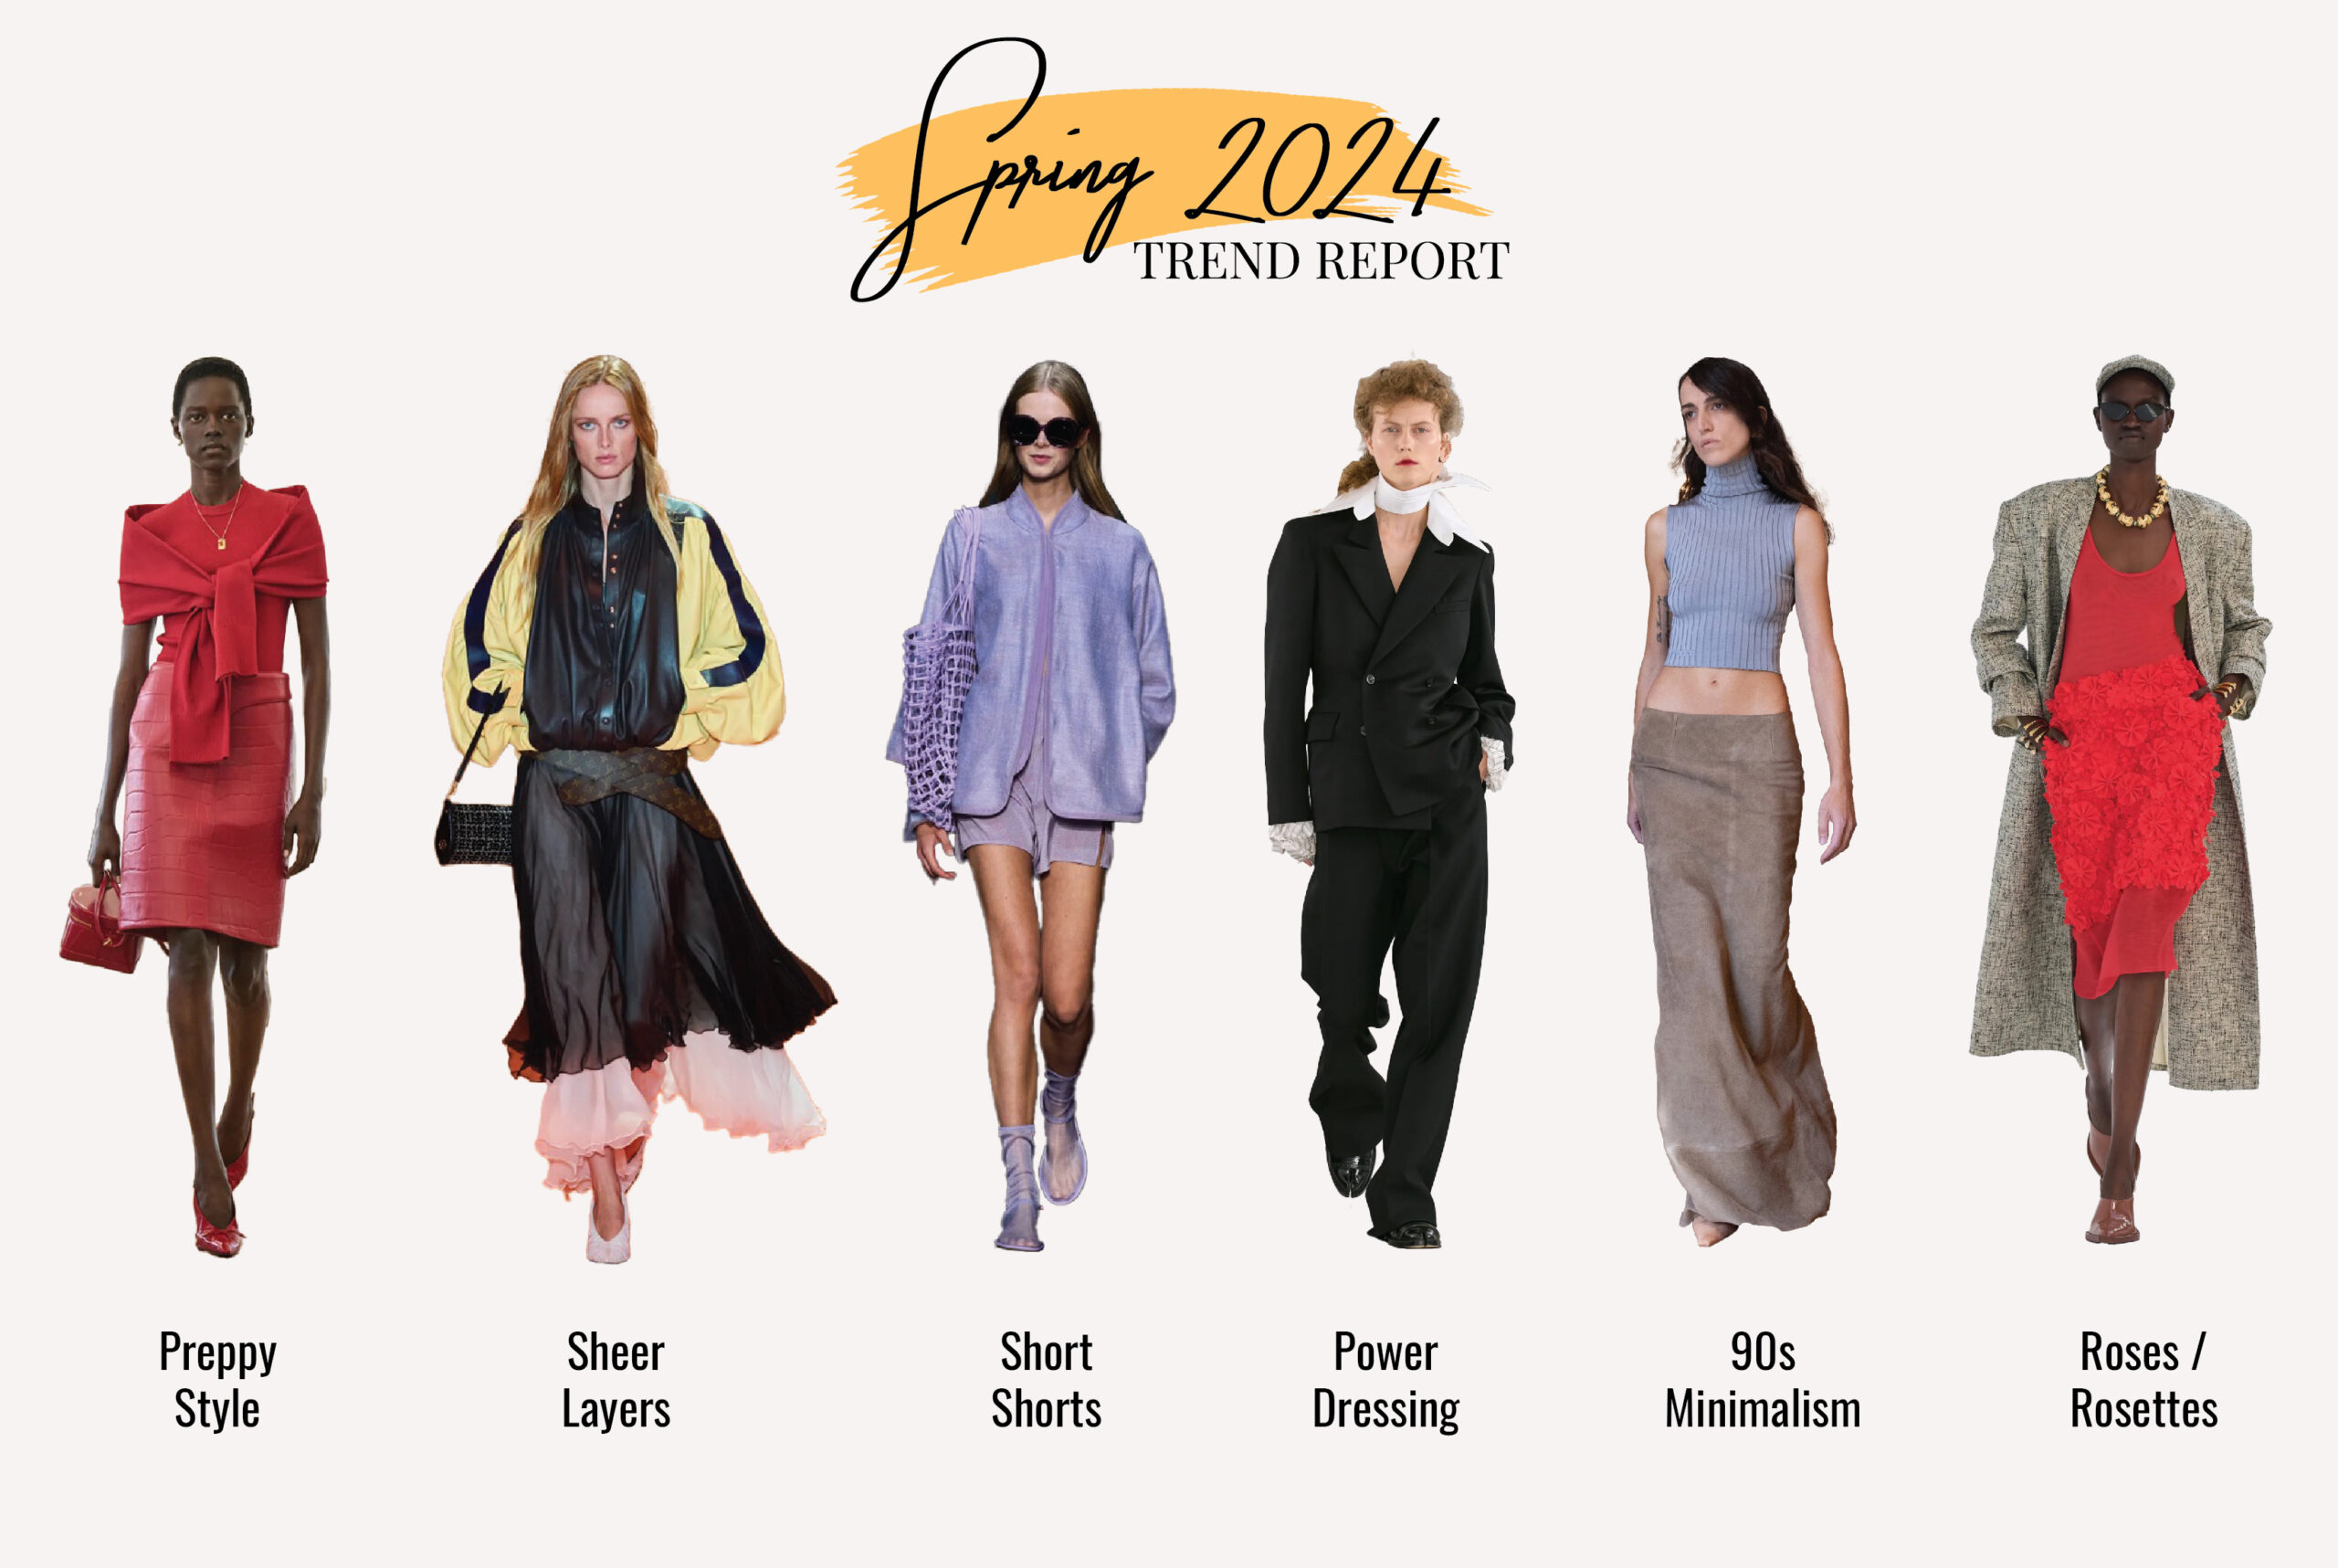 The State of Fashion 2024 report